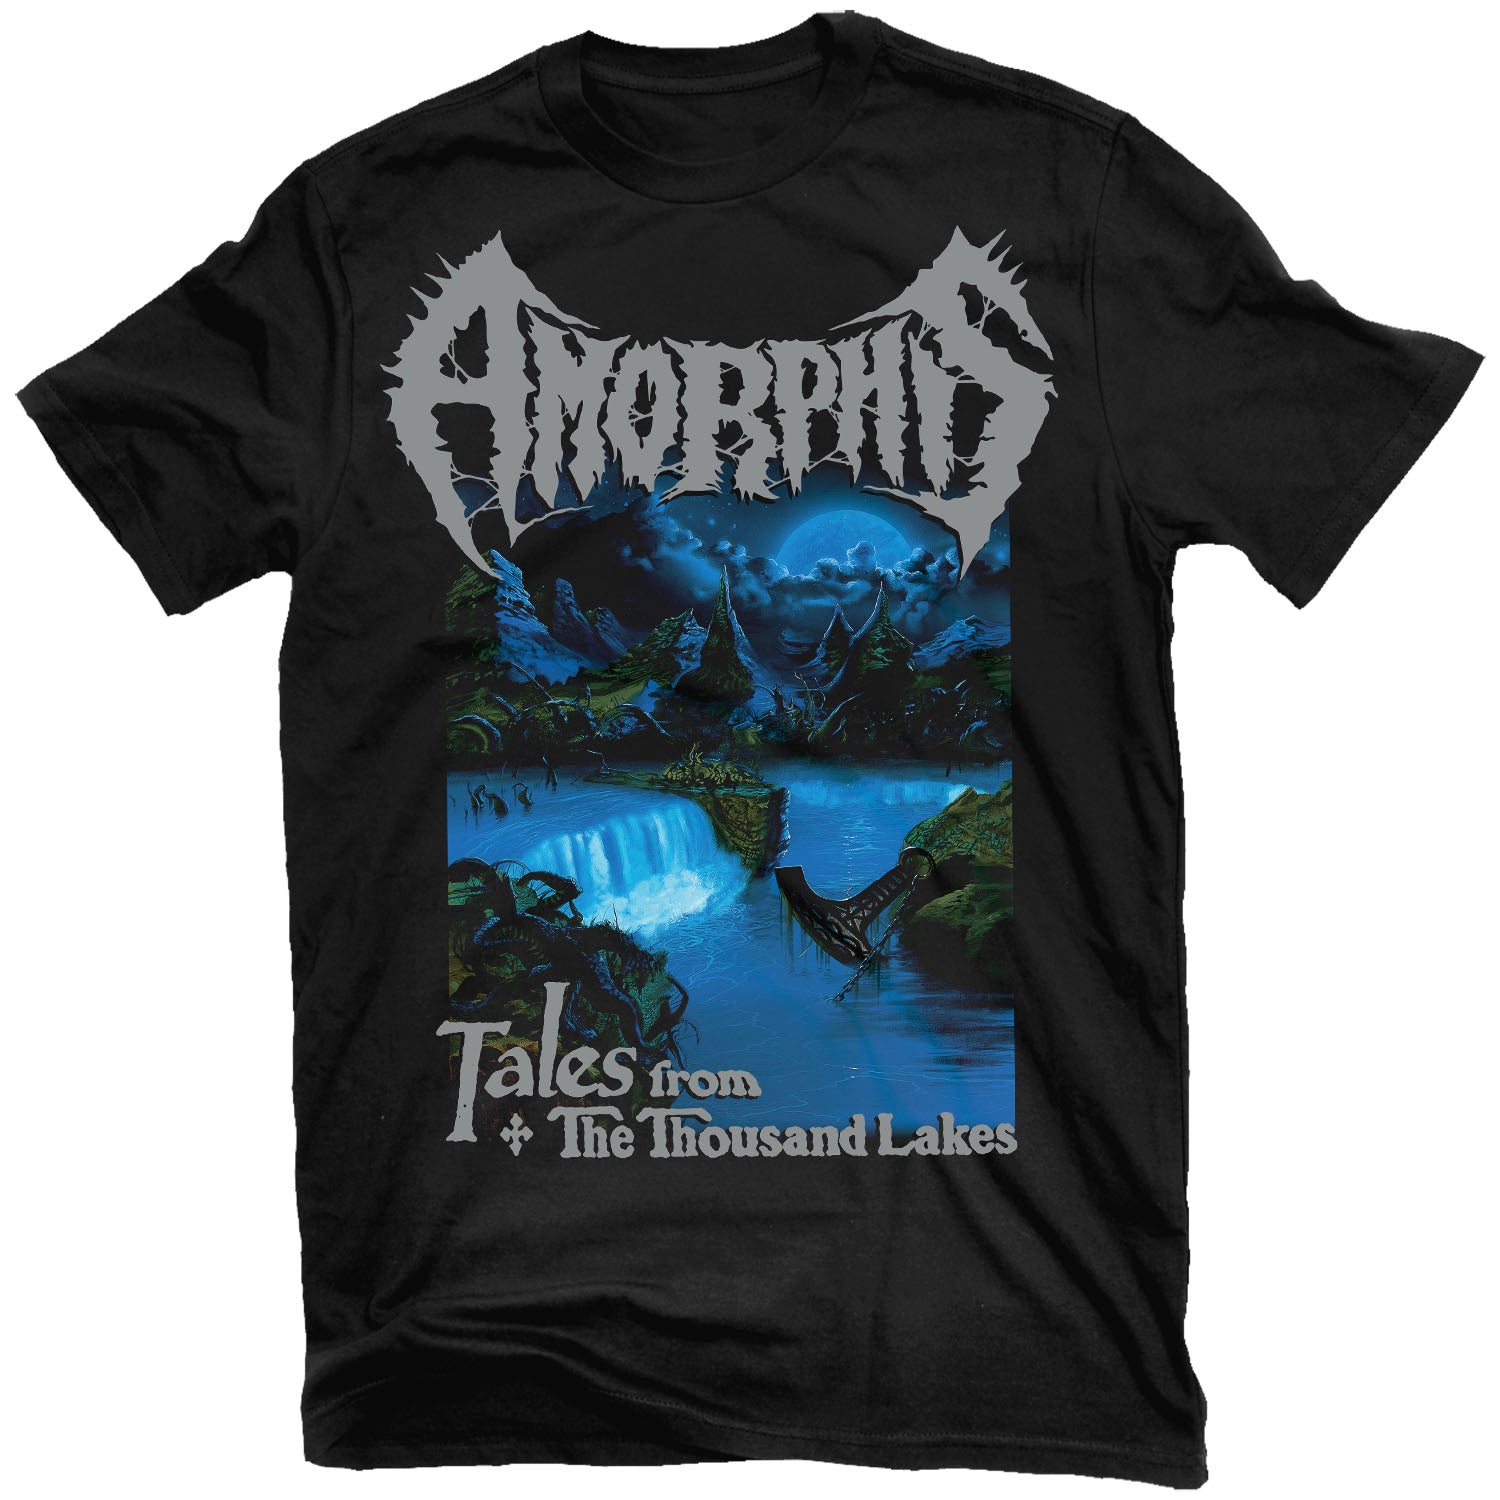 Amorphis "Tales from the Thousand Lakes" T-Shirt